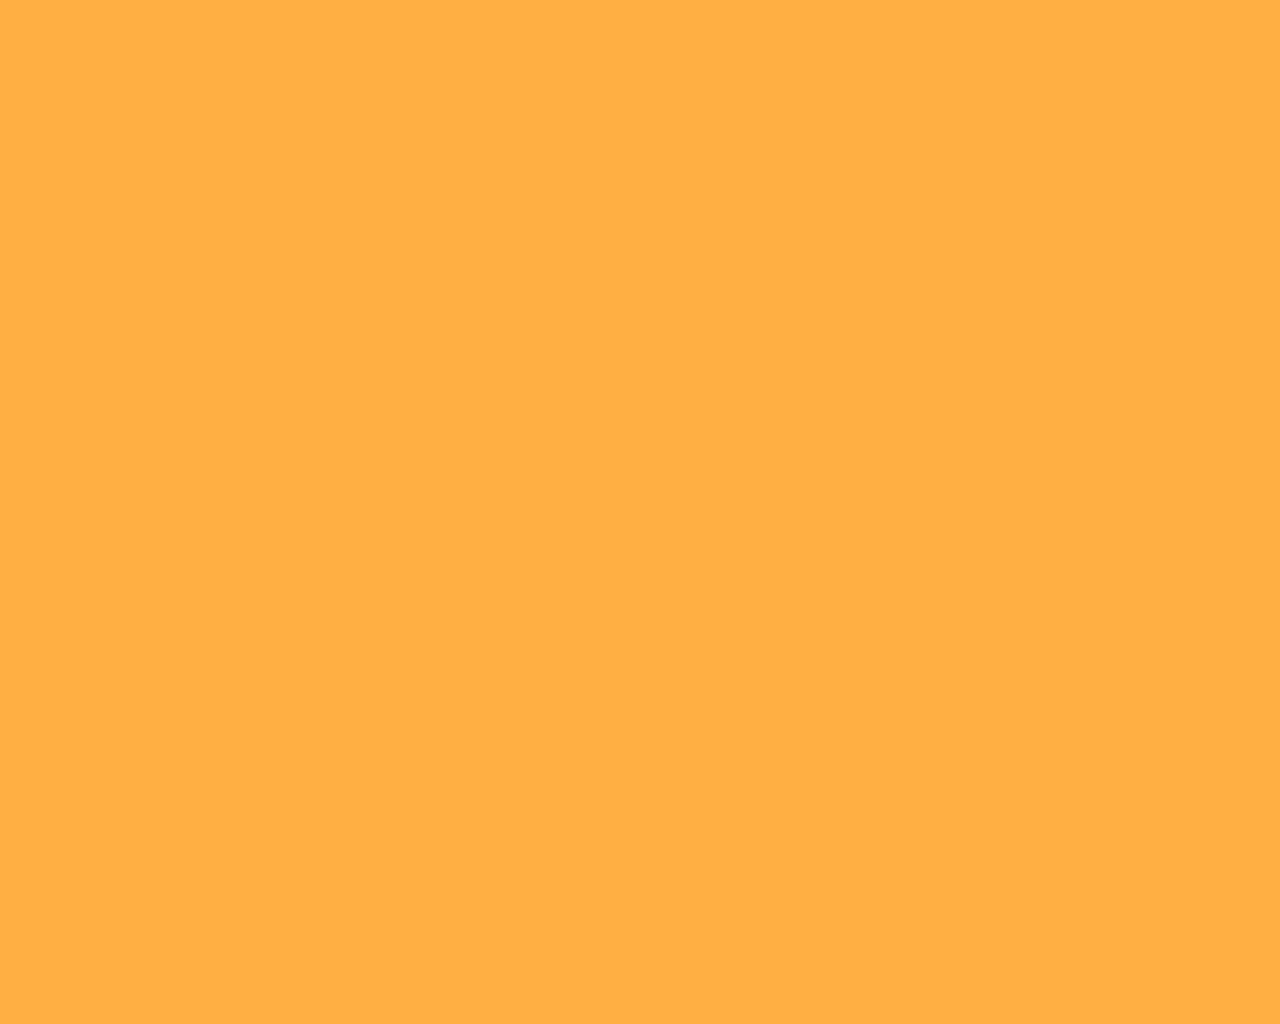 Bold and Bright Plain Yellow Background